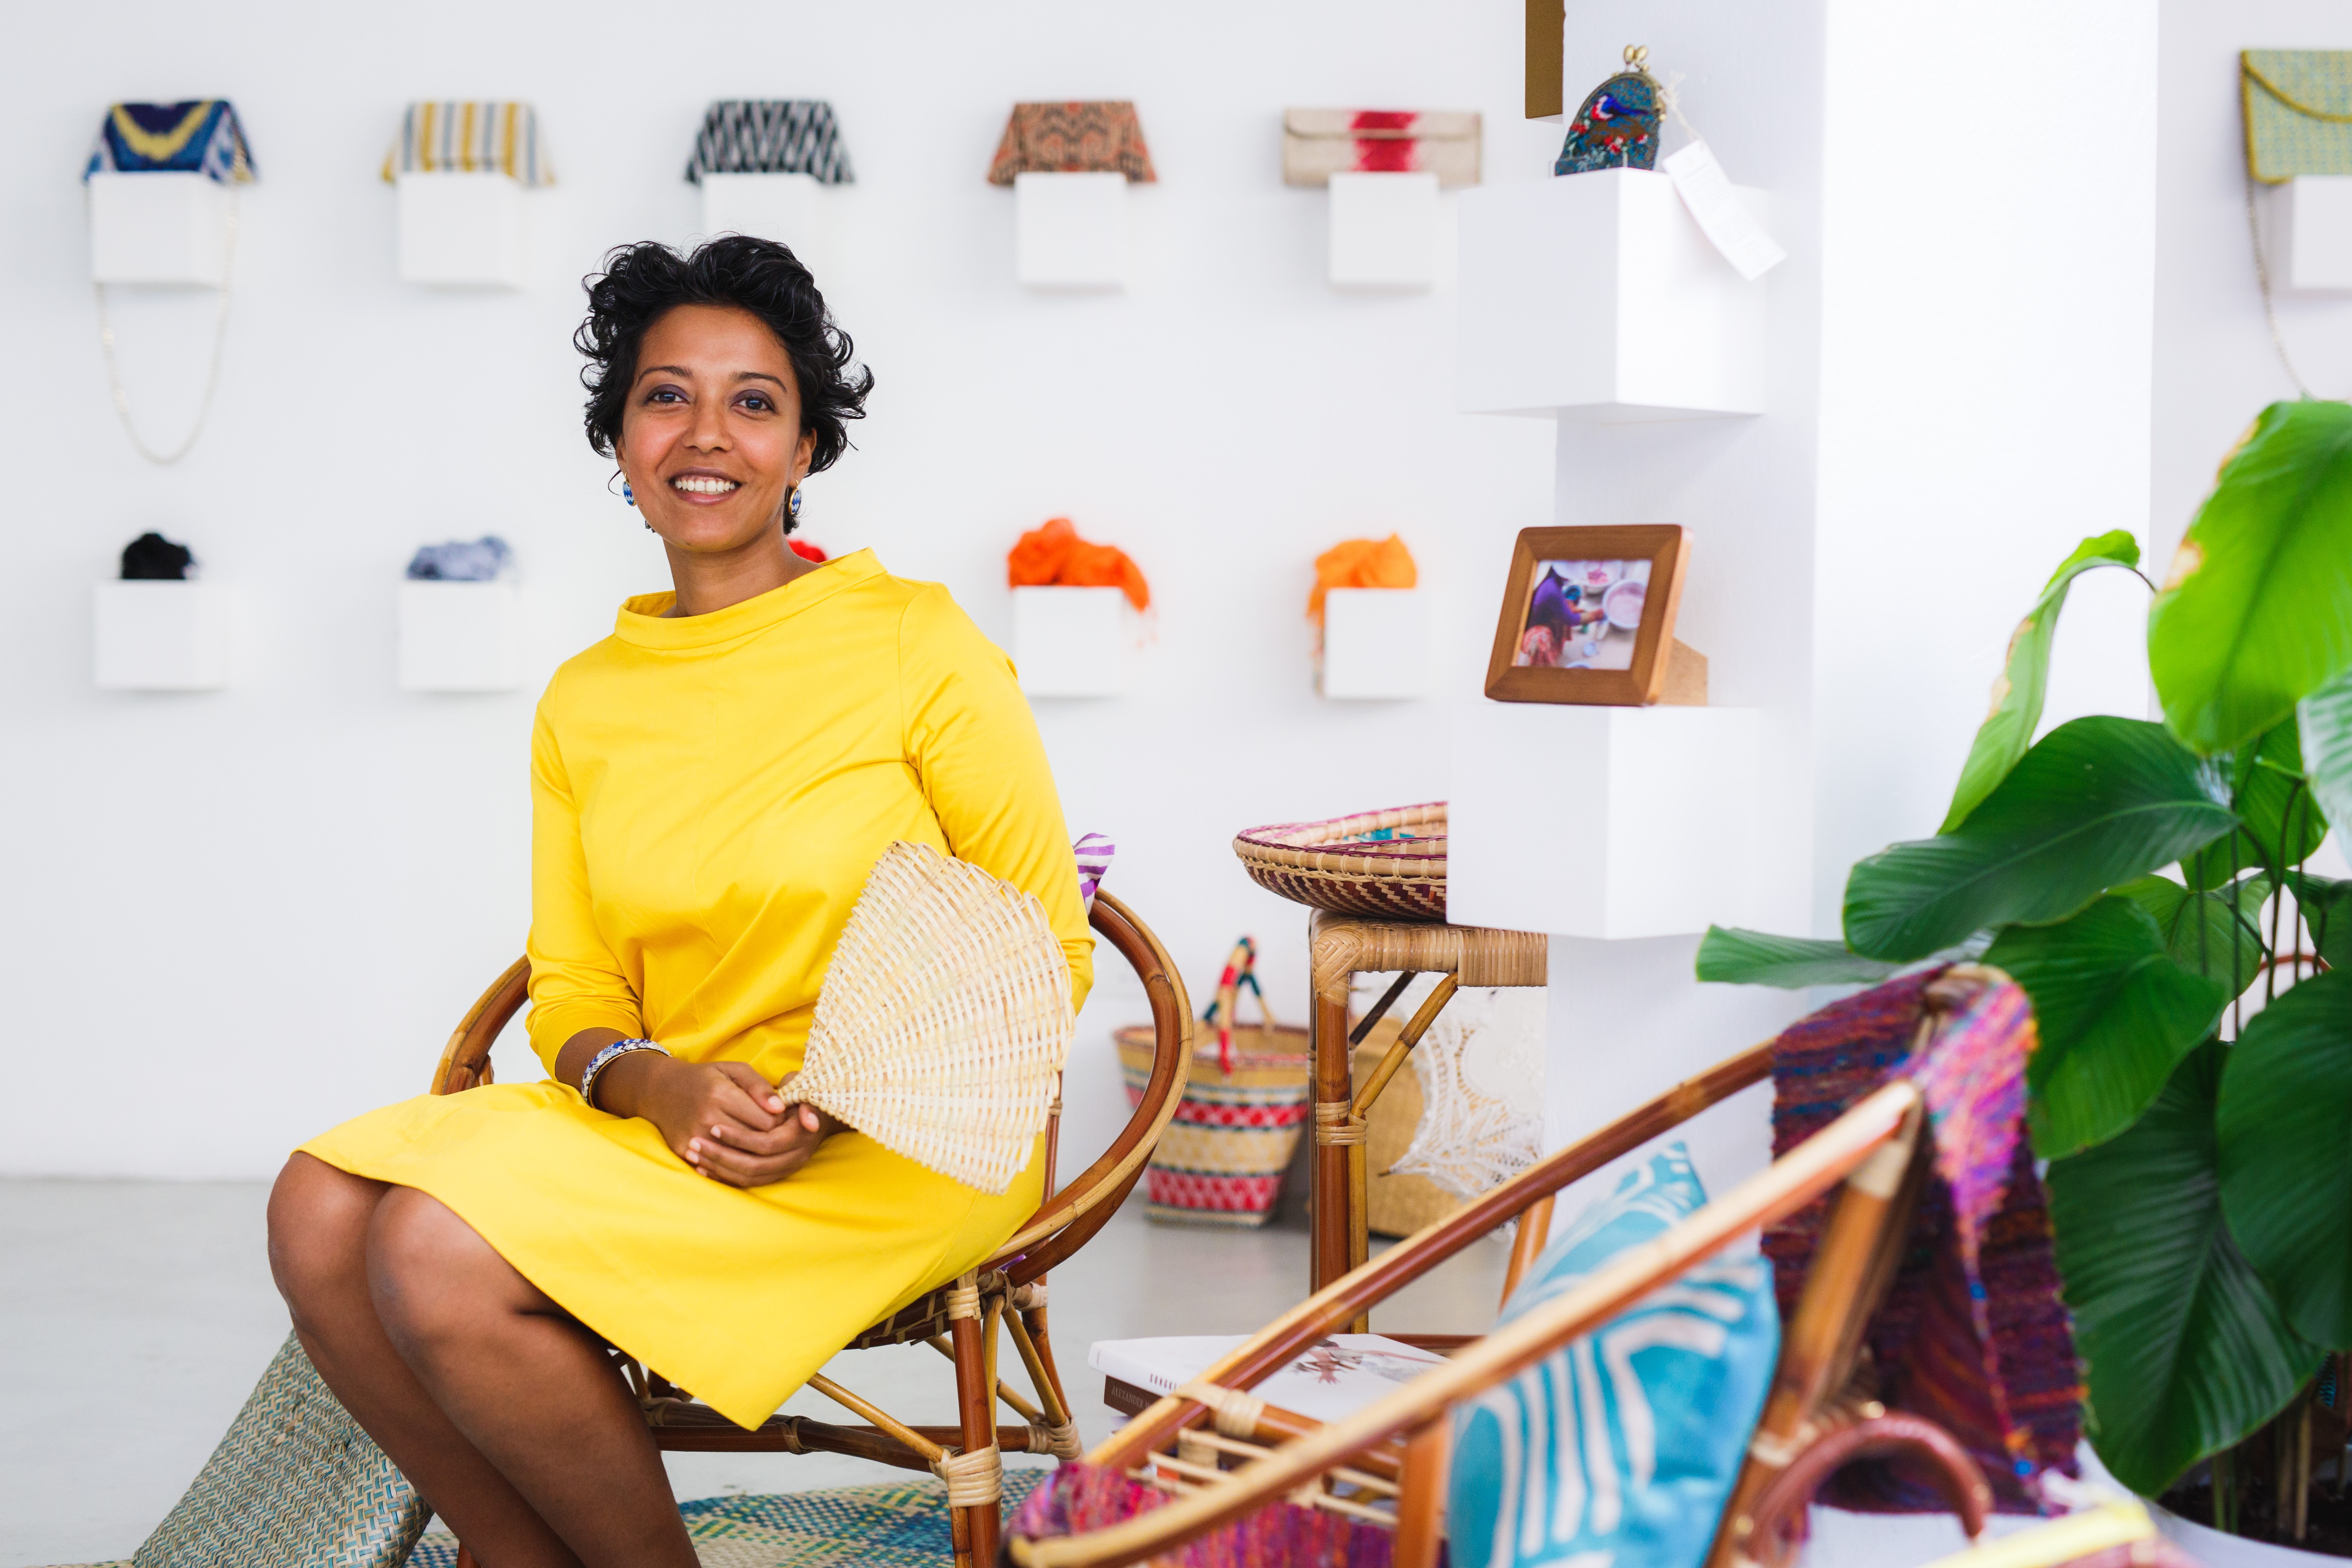 Sasibai Kimis, an investment banker turned social entrepreneur who is trying to take ethical fashion into the mainstream, in her Kuala Lumpur store.